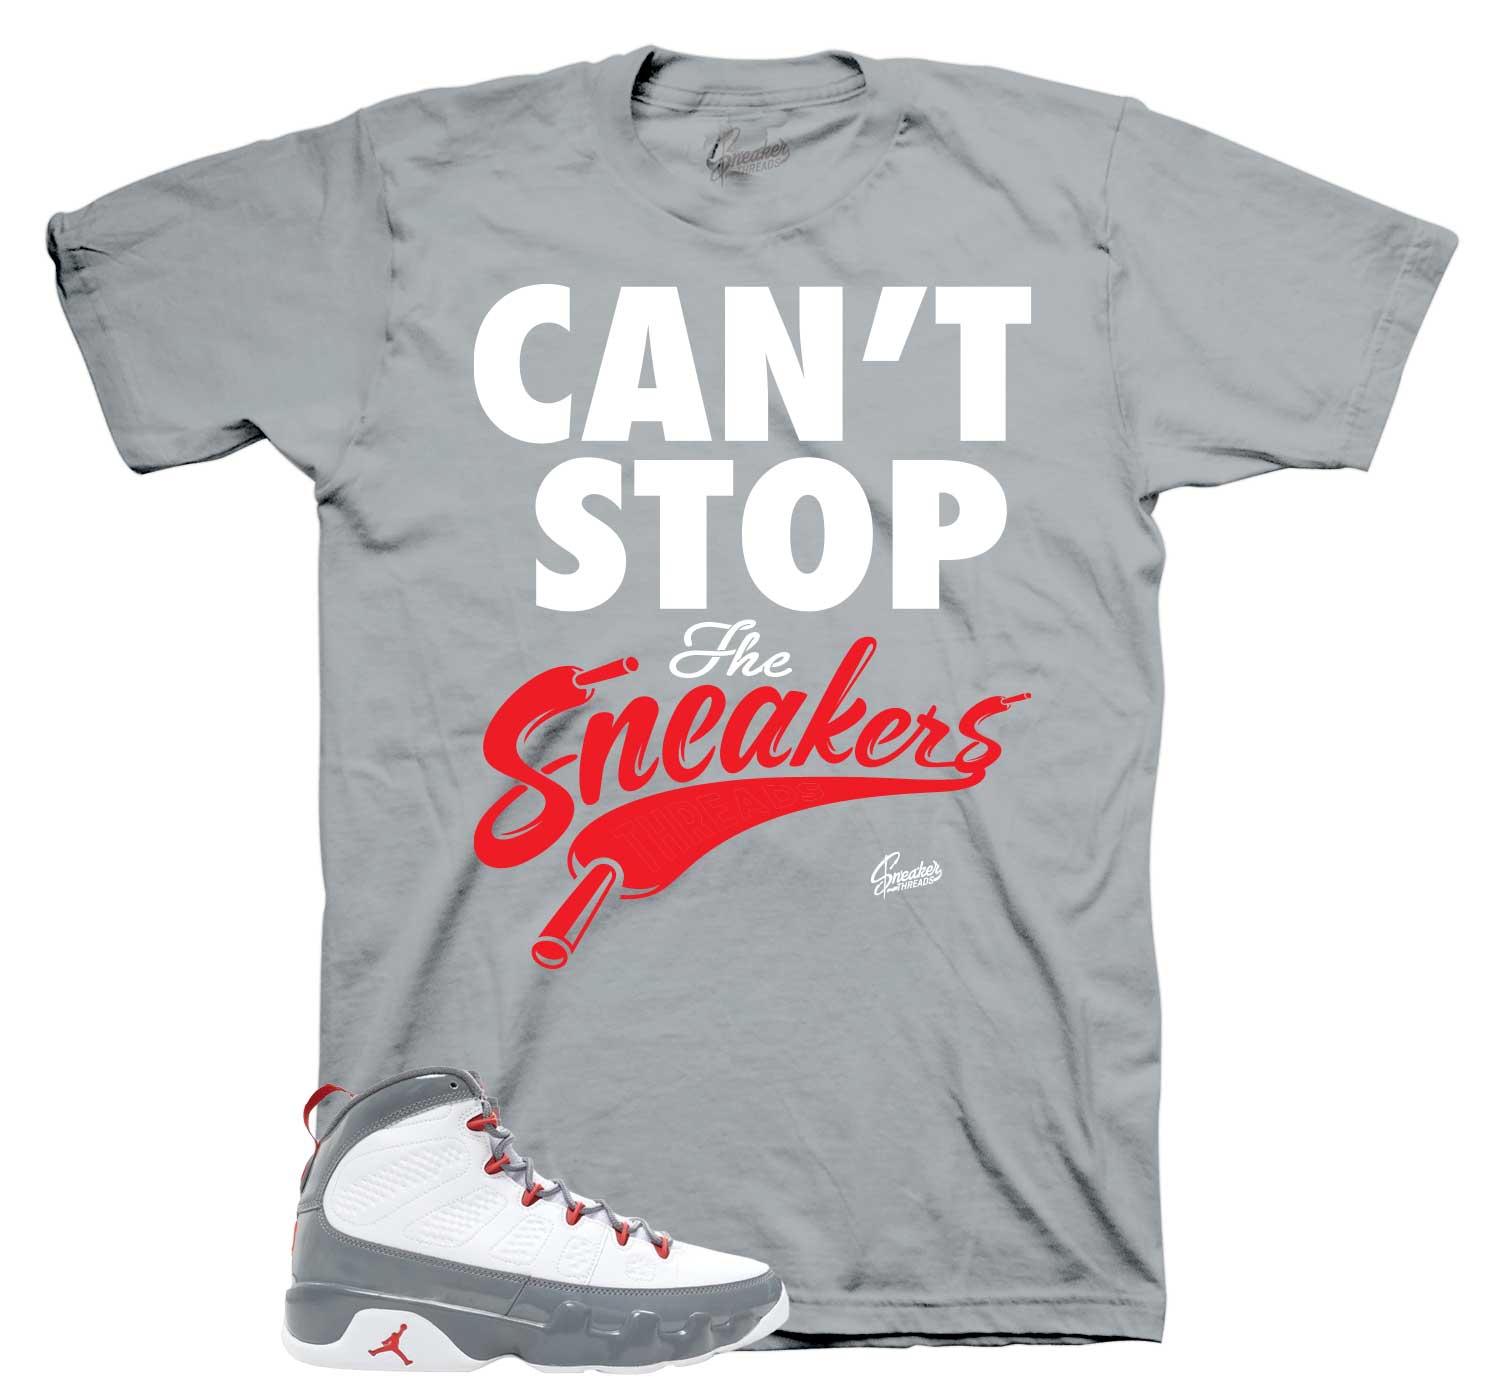 Retro 9 Fire Red Shirt - Can't Stop - Grey